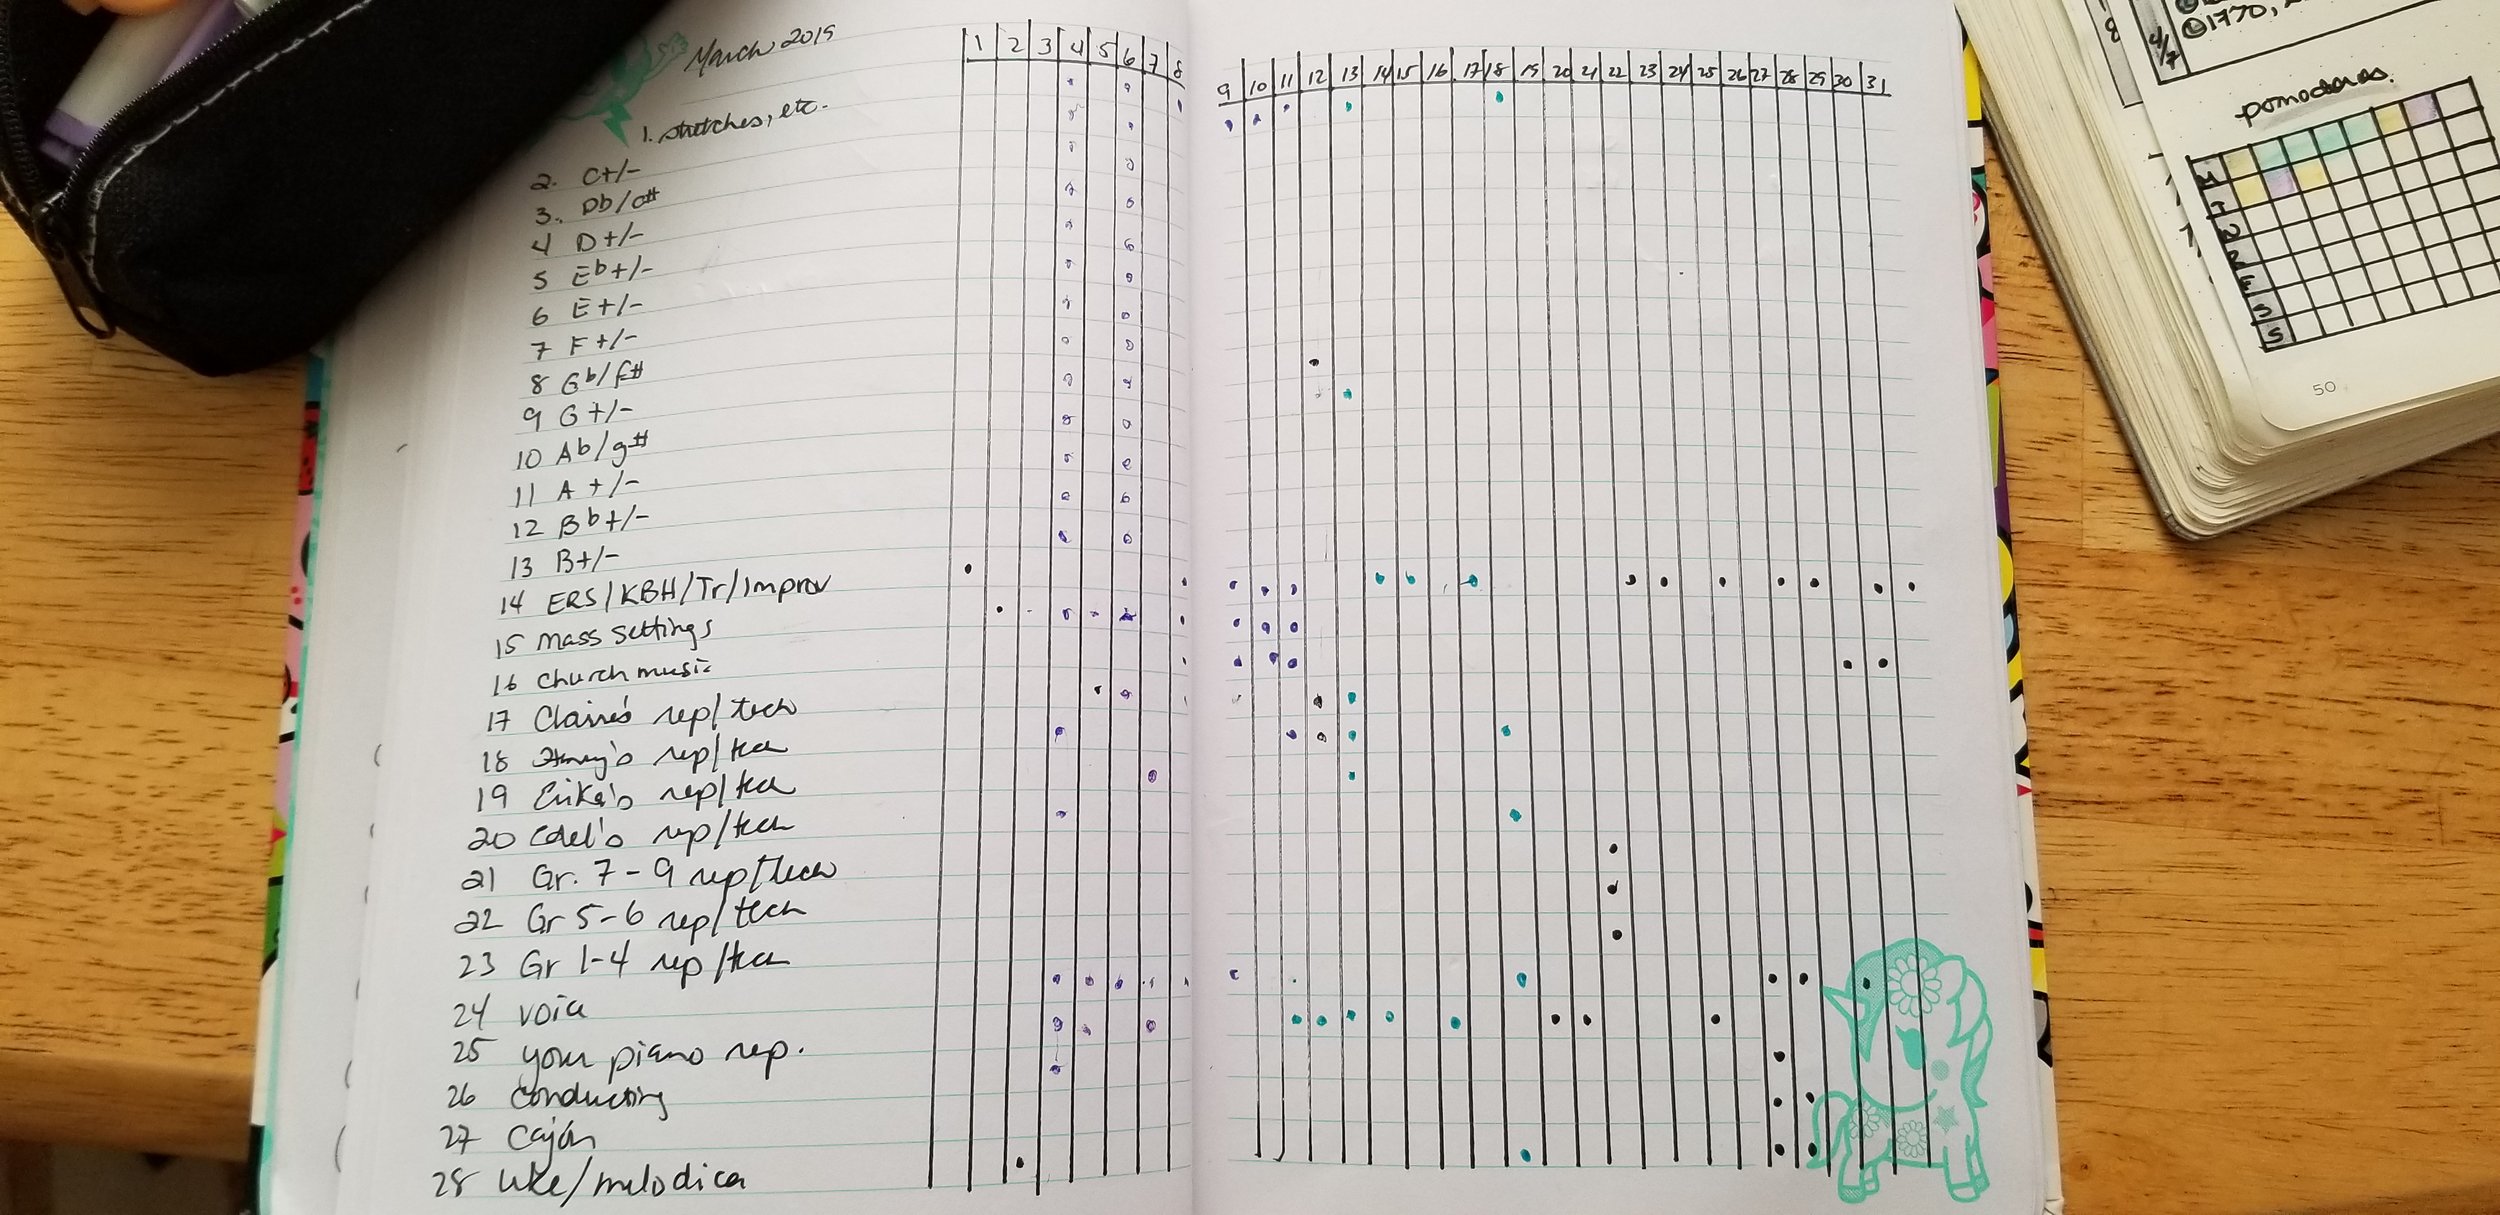 March 2019 Music Practice Tracker